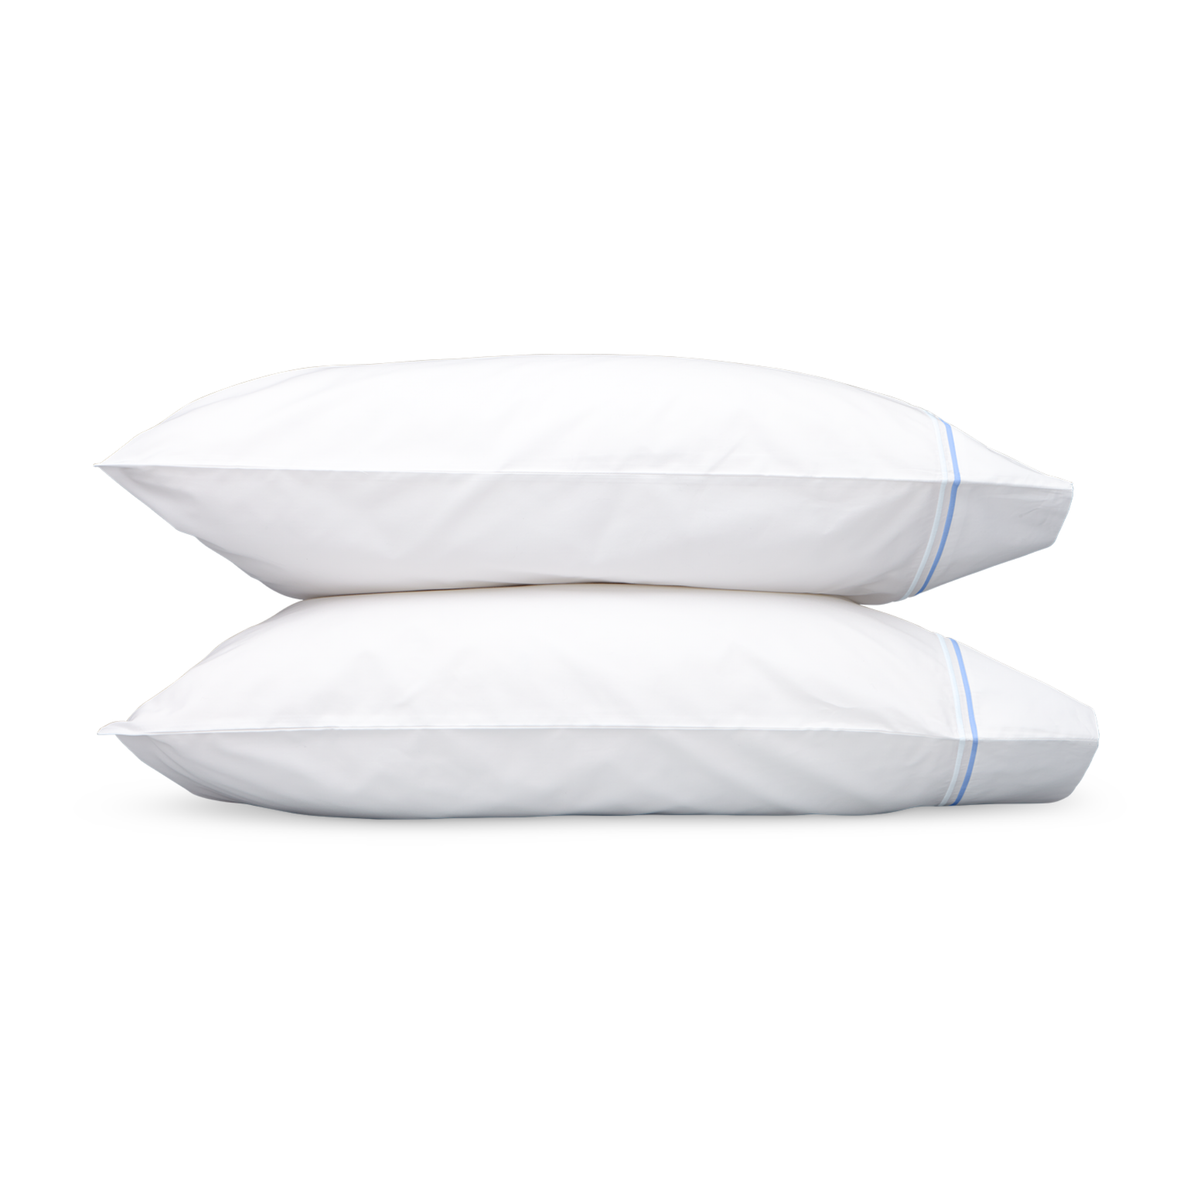 Pair of Pillowcases of Matouk Essex Bedding Collection in Azure Color